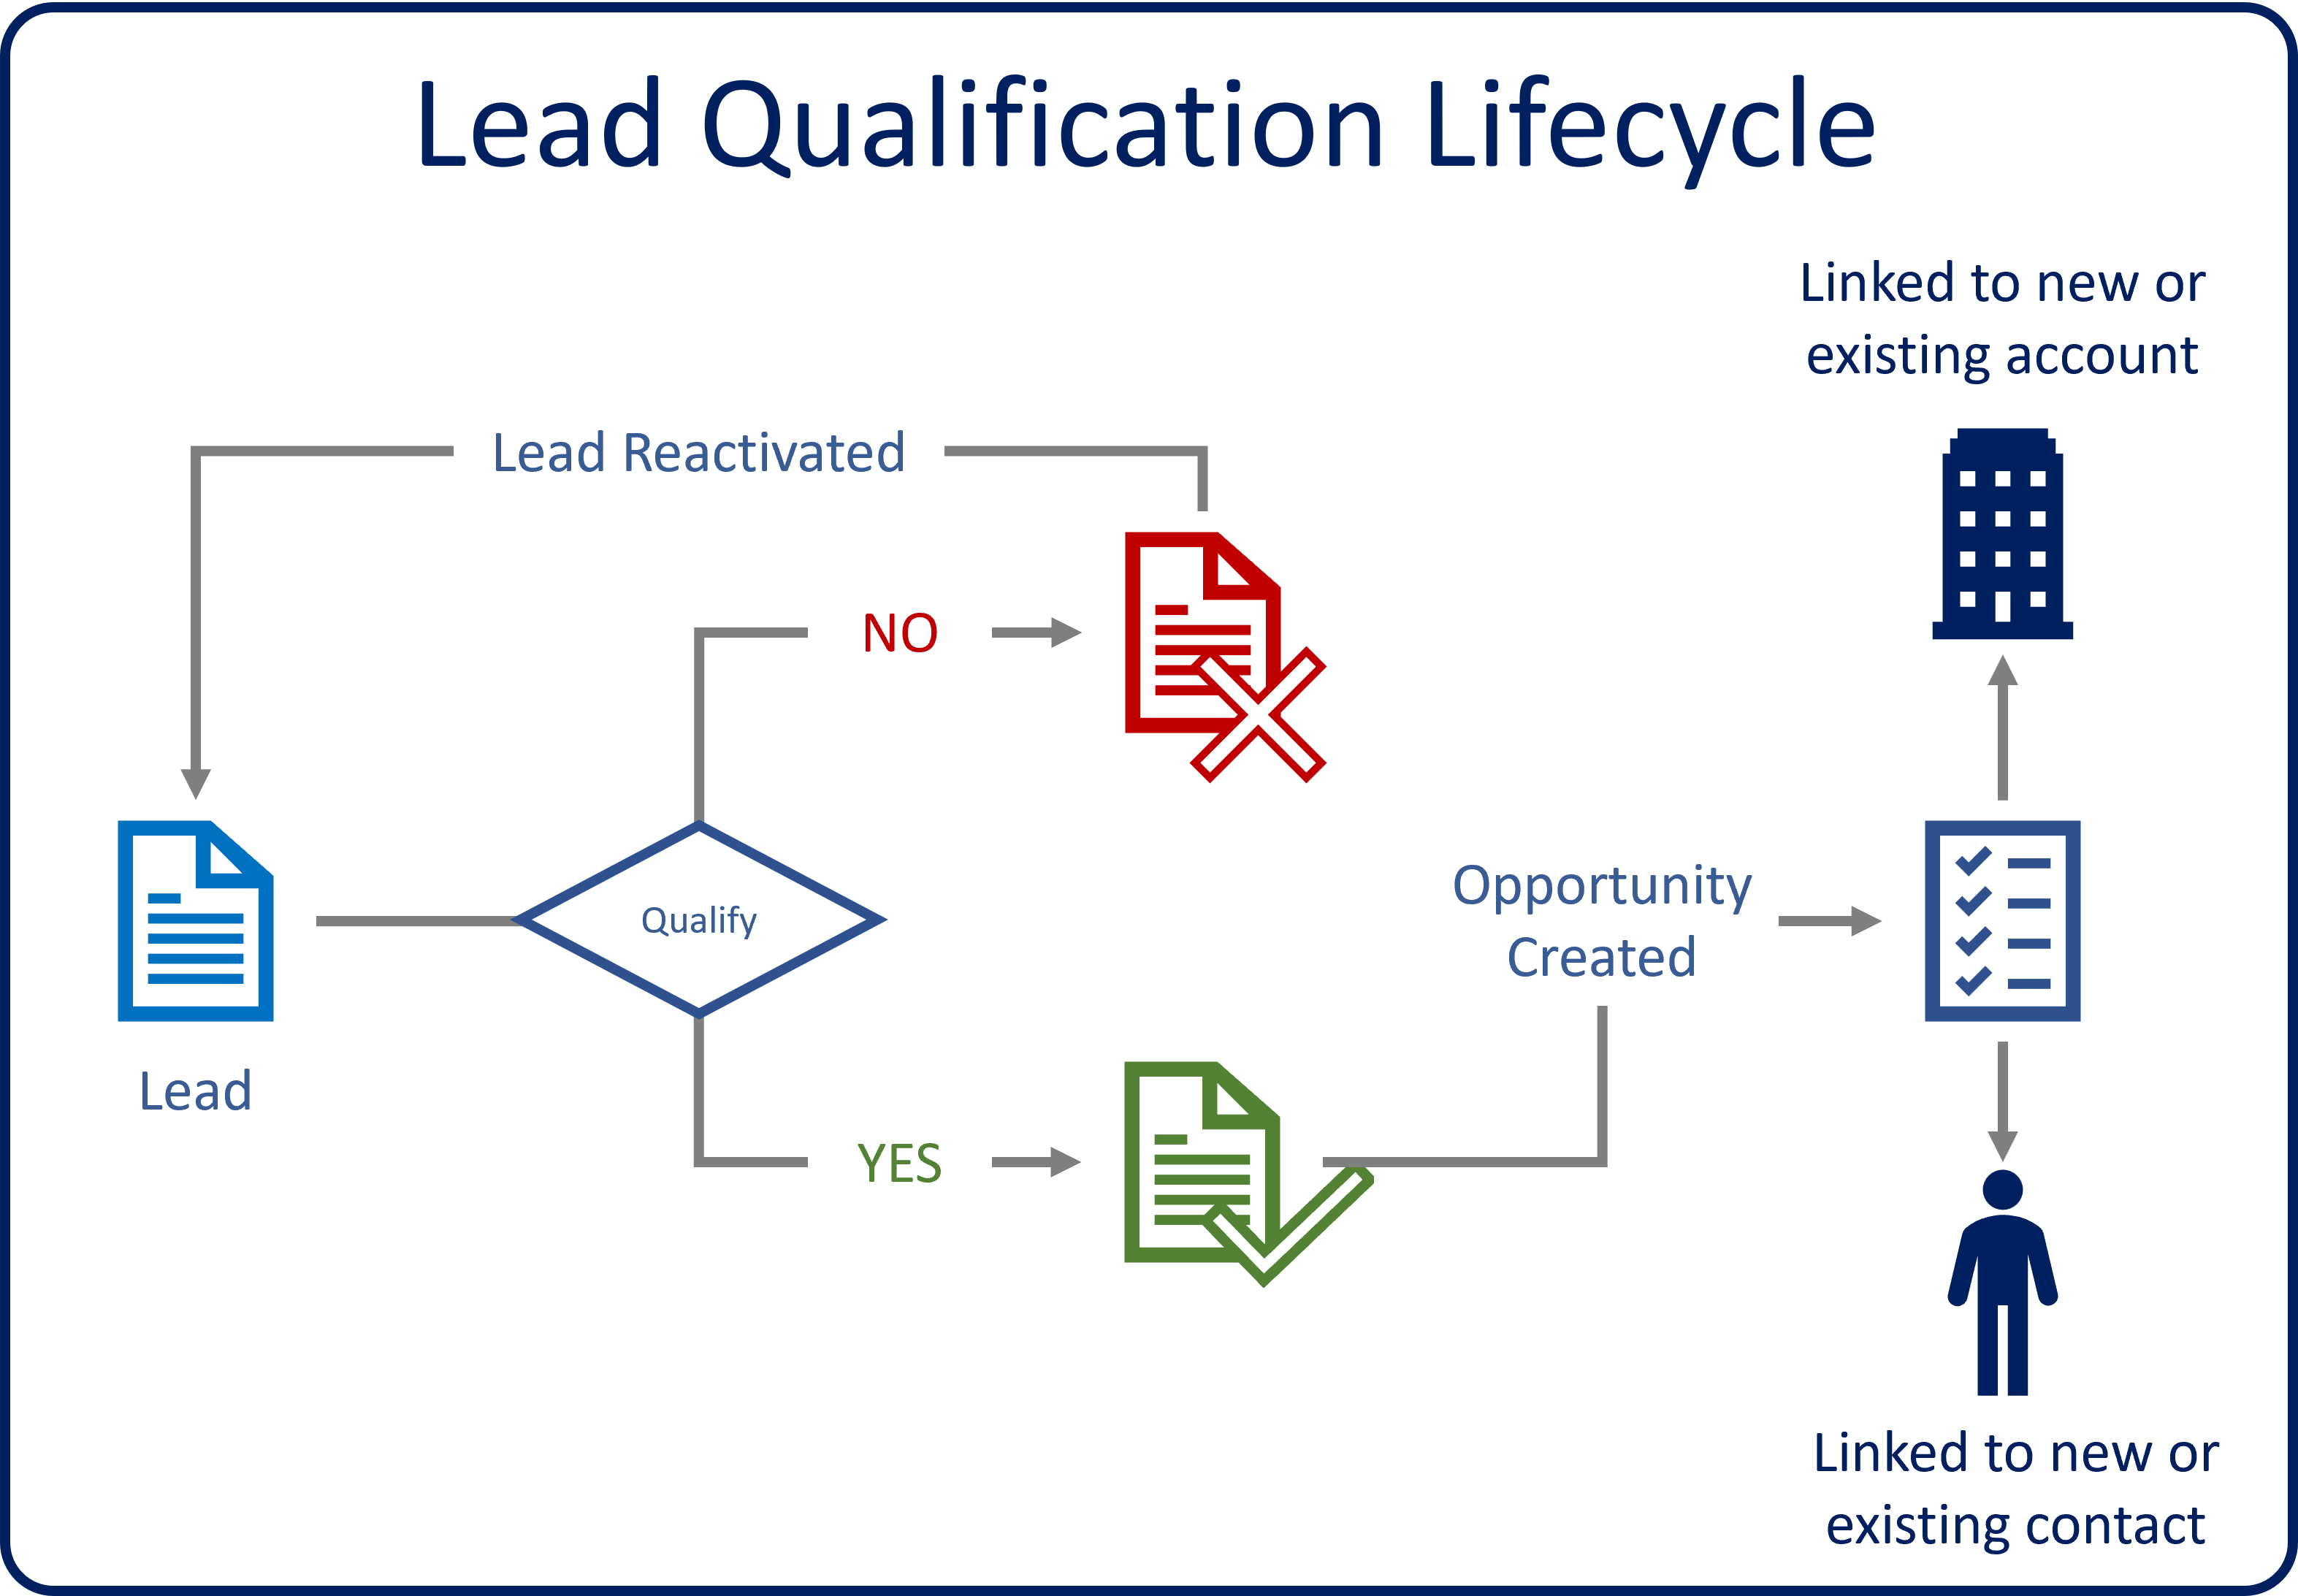 Lead qualification lifecycle. Lead > Qualify > yes or no (no > x or reactivated). Yes > opportunity created > linked to new or existing account or contact.